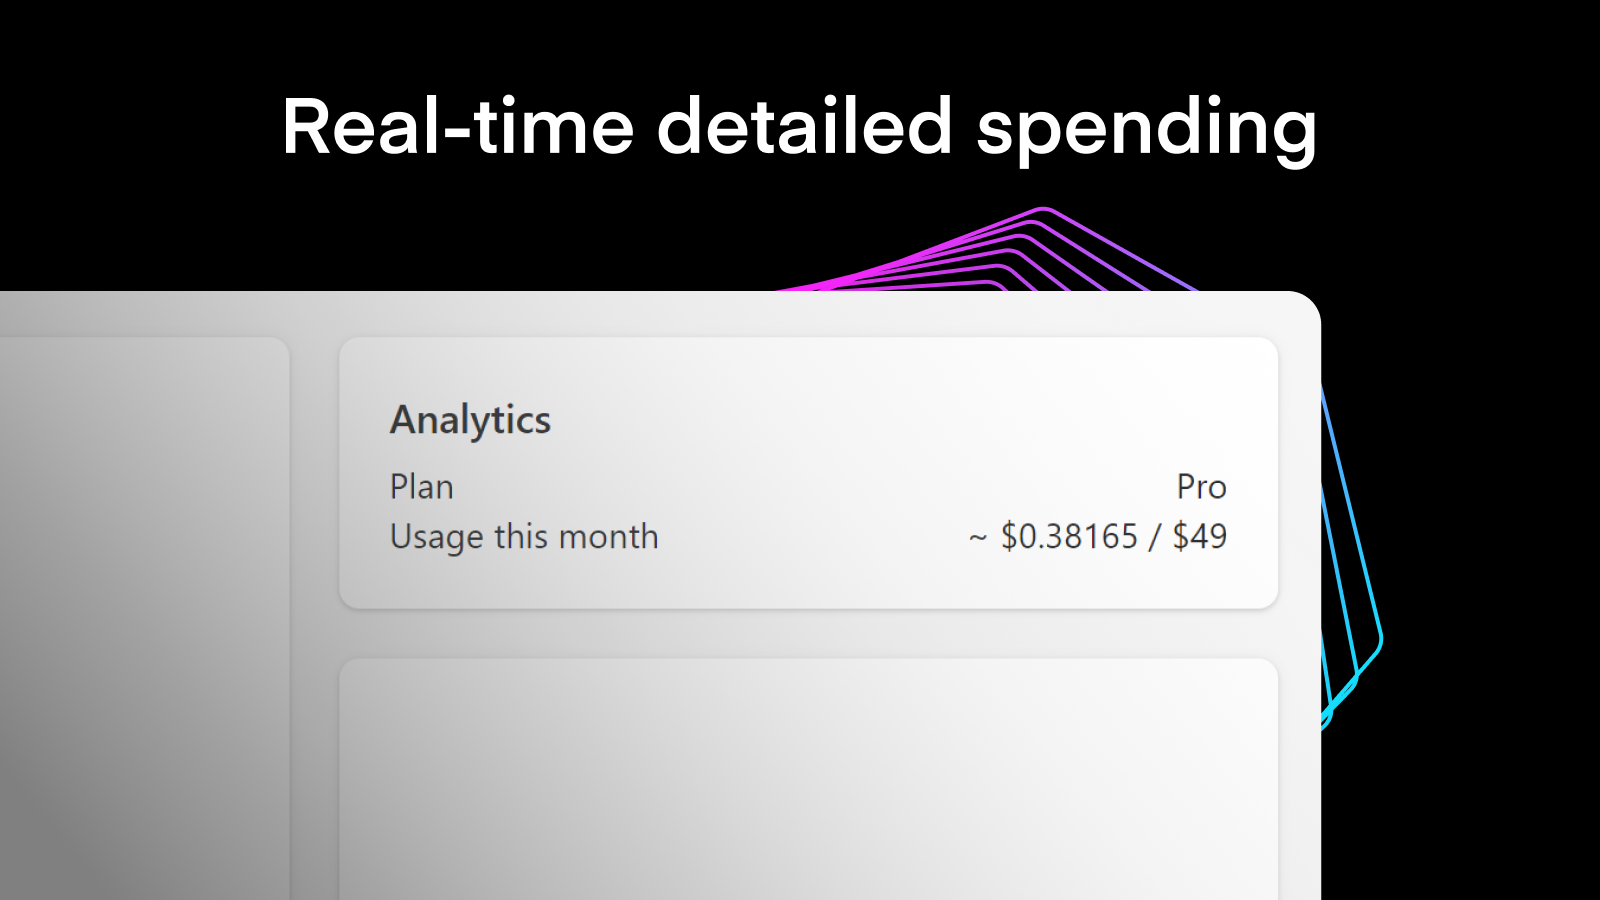 Real-time detailed spending